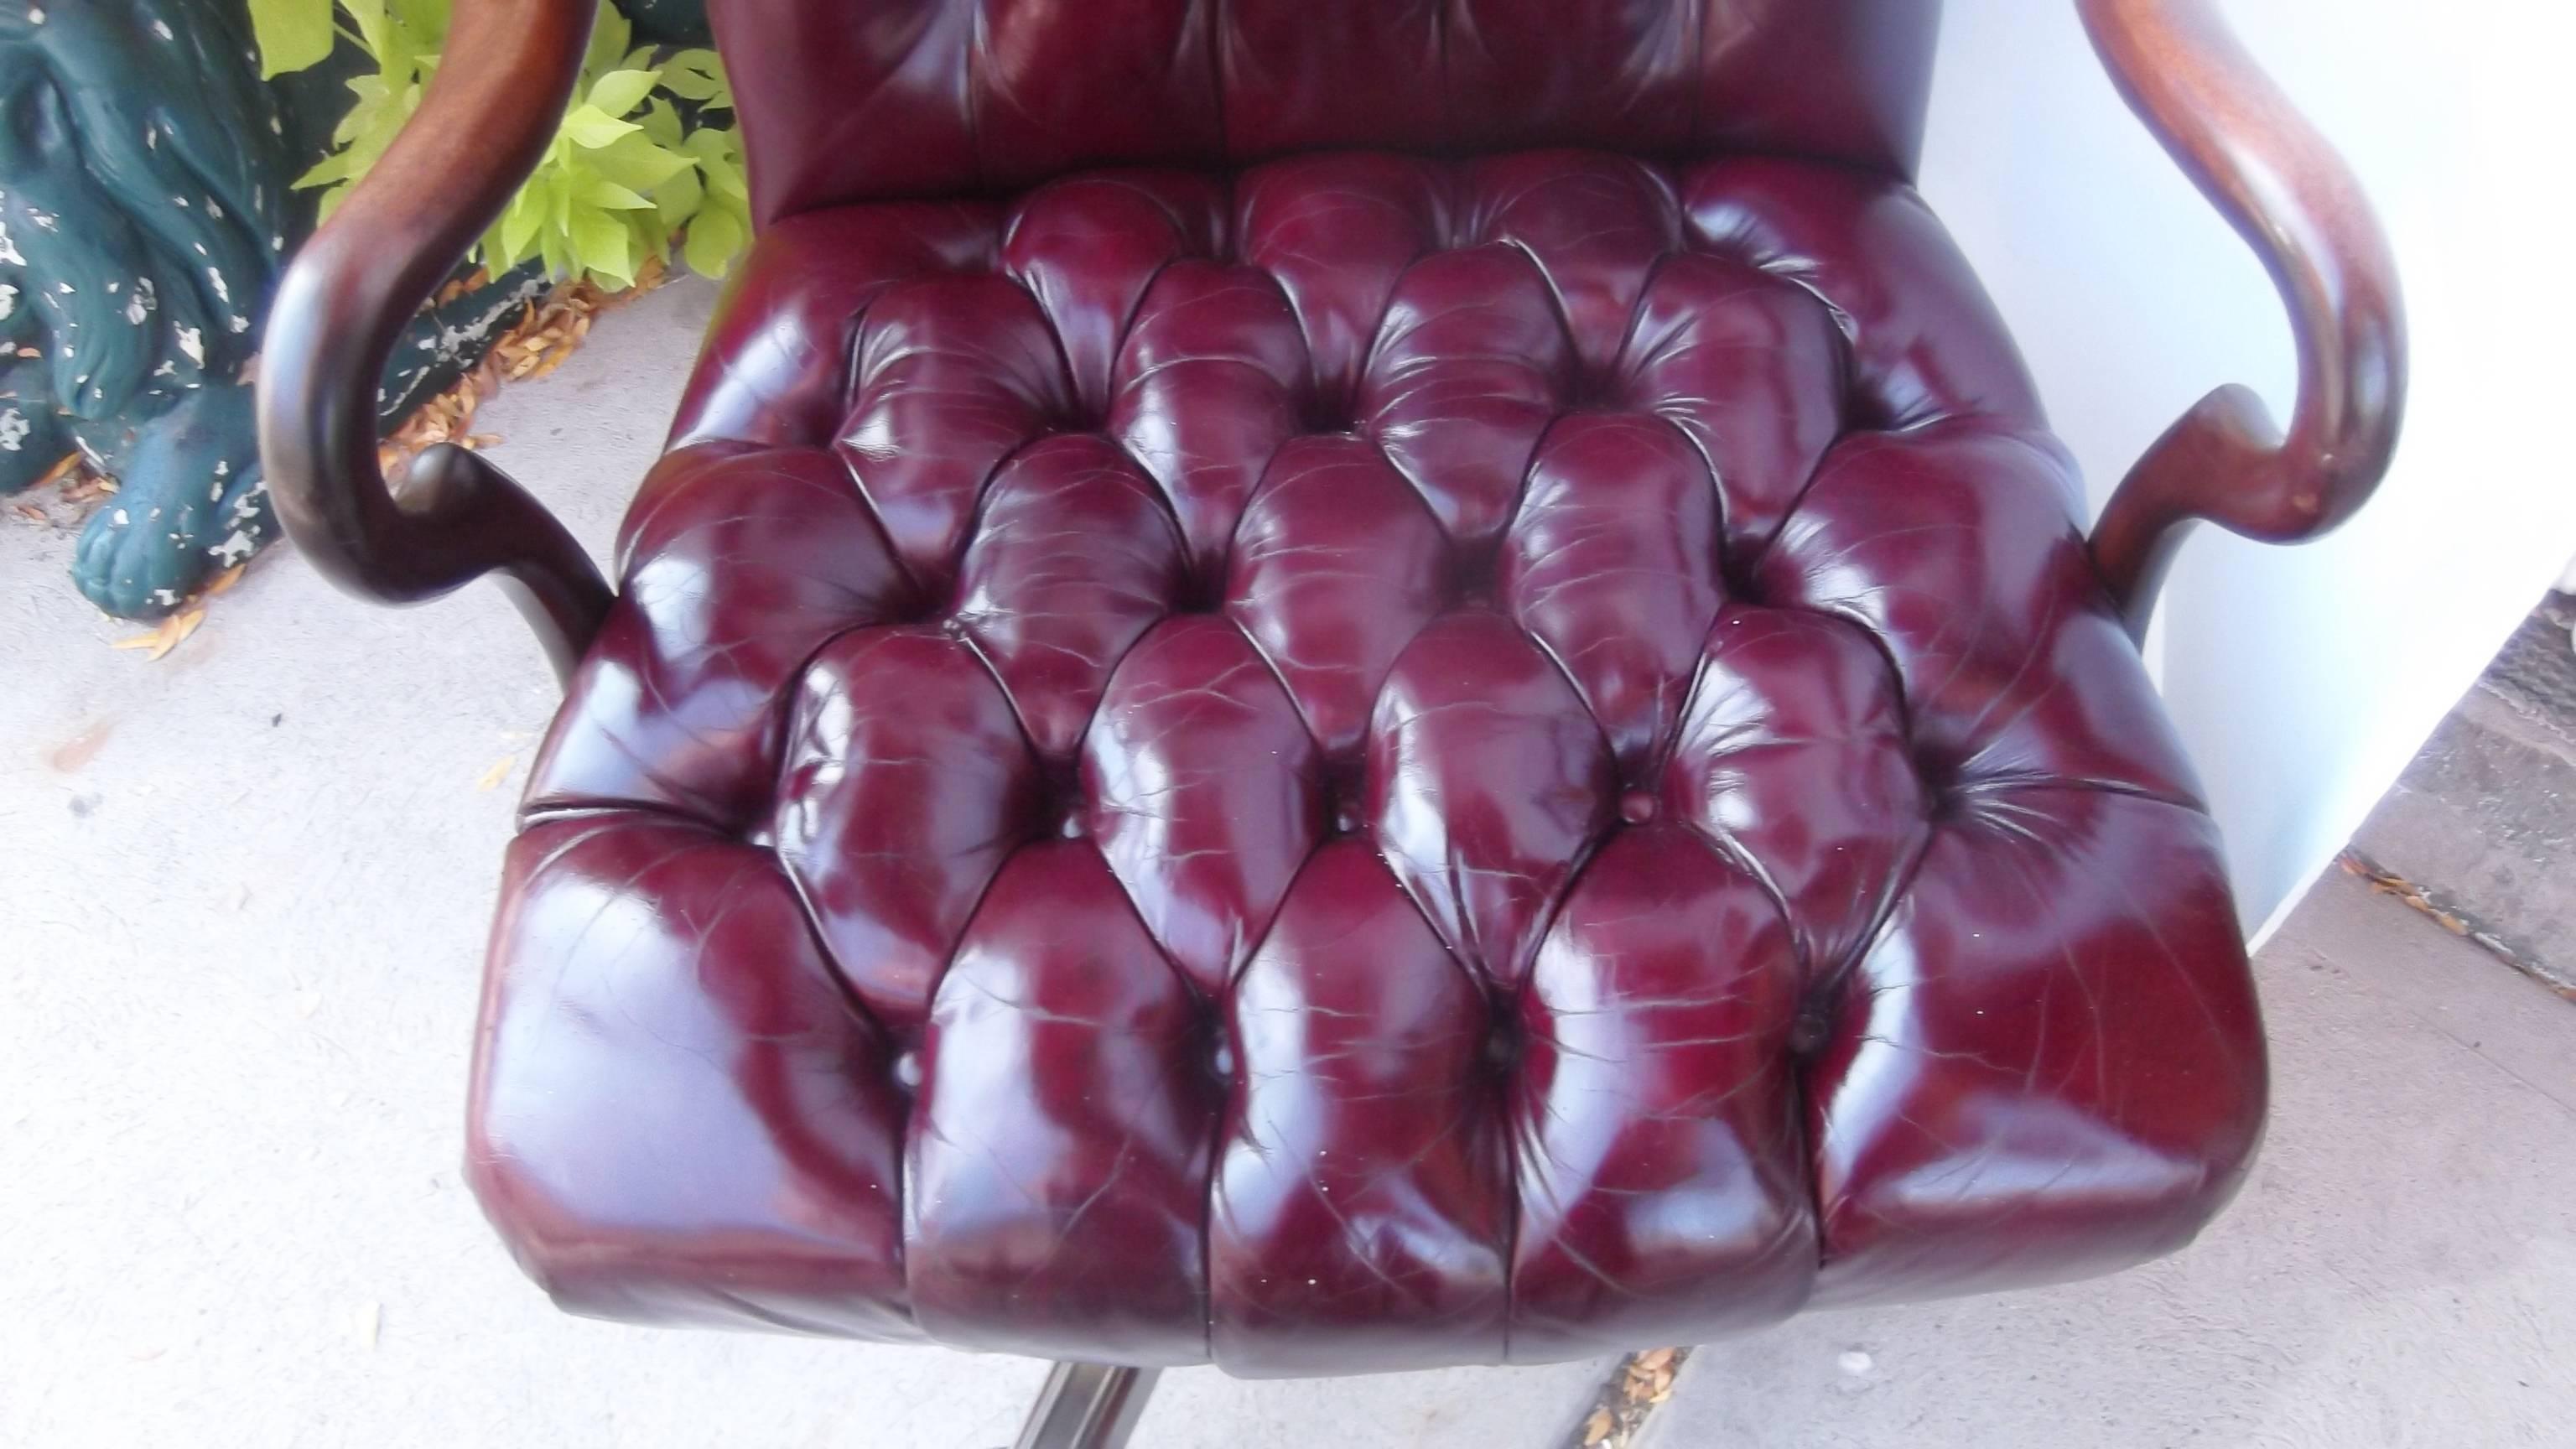 Cordovan leather chair with mahogany goose neck arms.
Biscuit tufted back and seat, resting on mahogany swivel base.
All leather front to back.